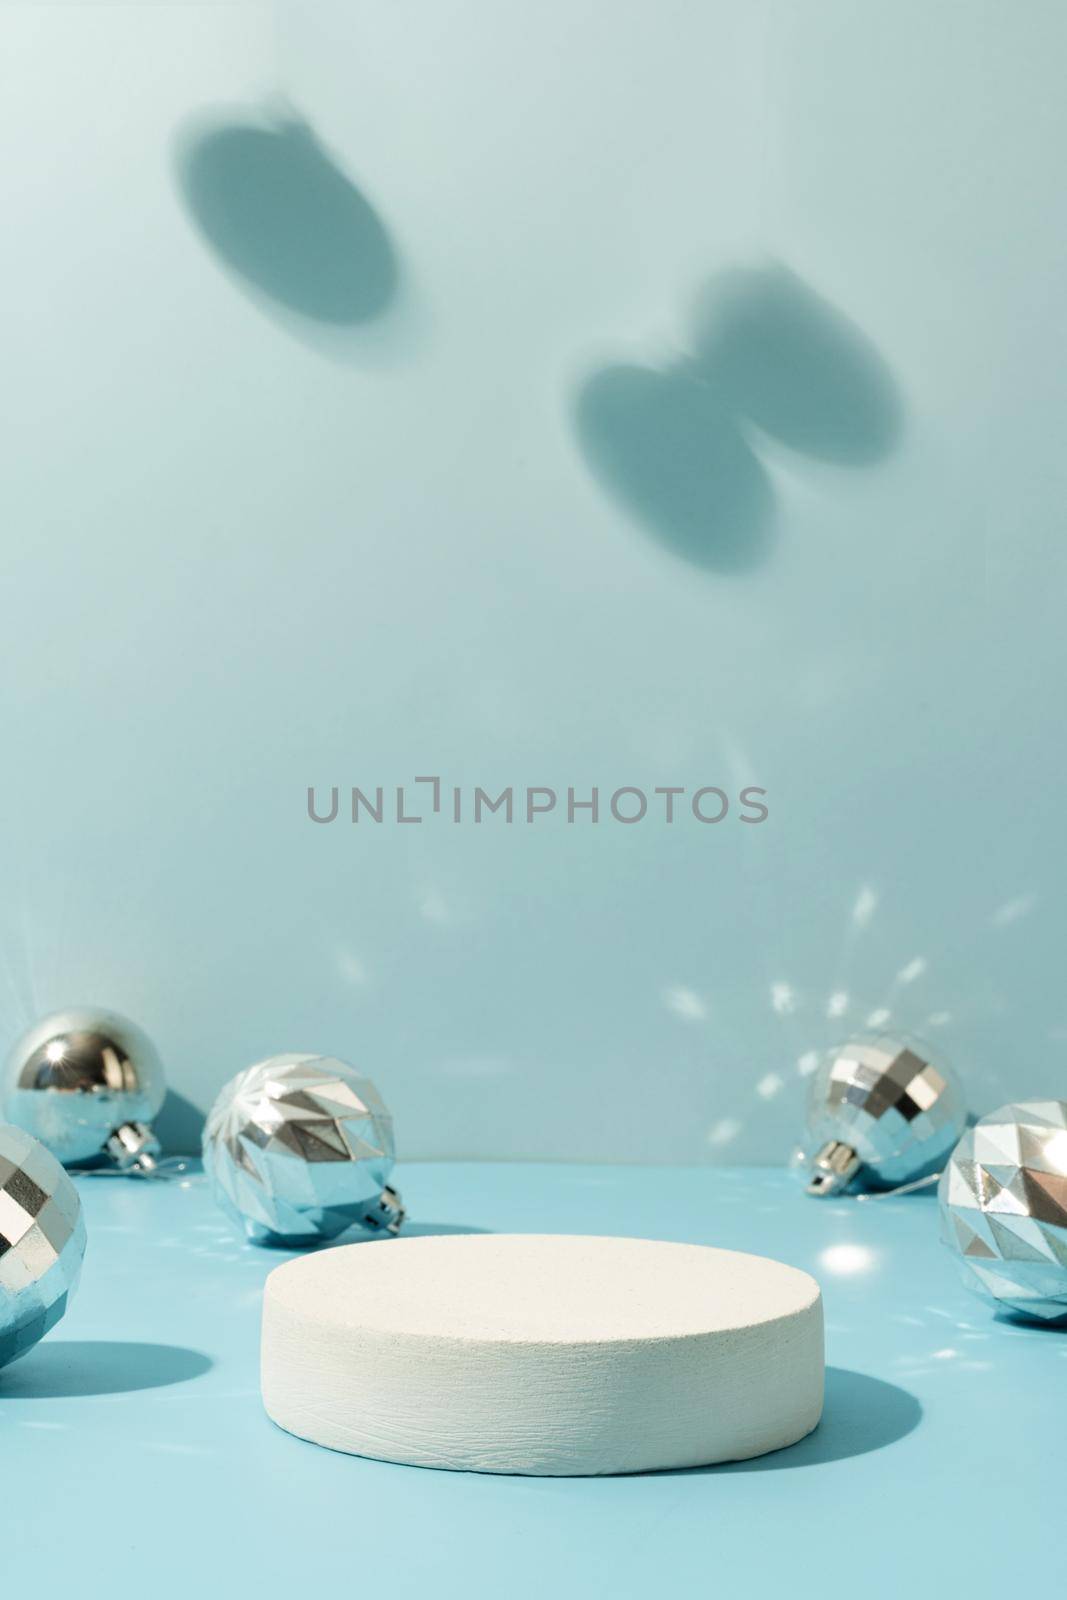 A minimalistic scene of a podium with christmas decorative balls on a light blue background by Desperada